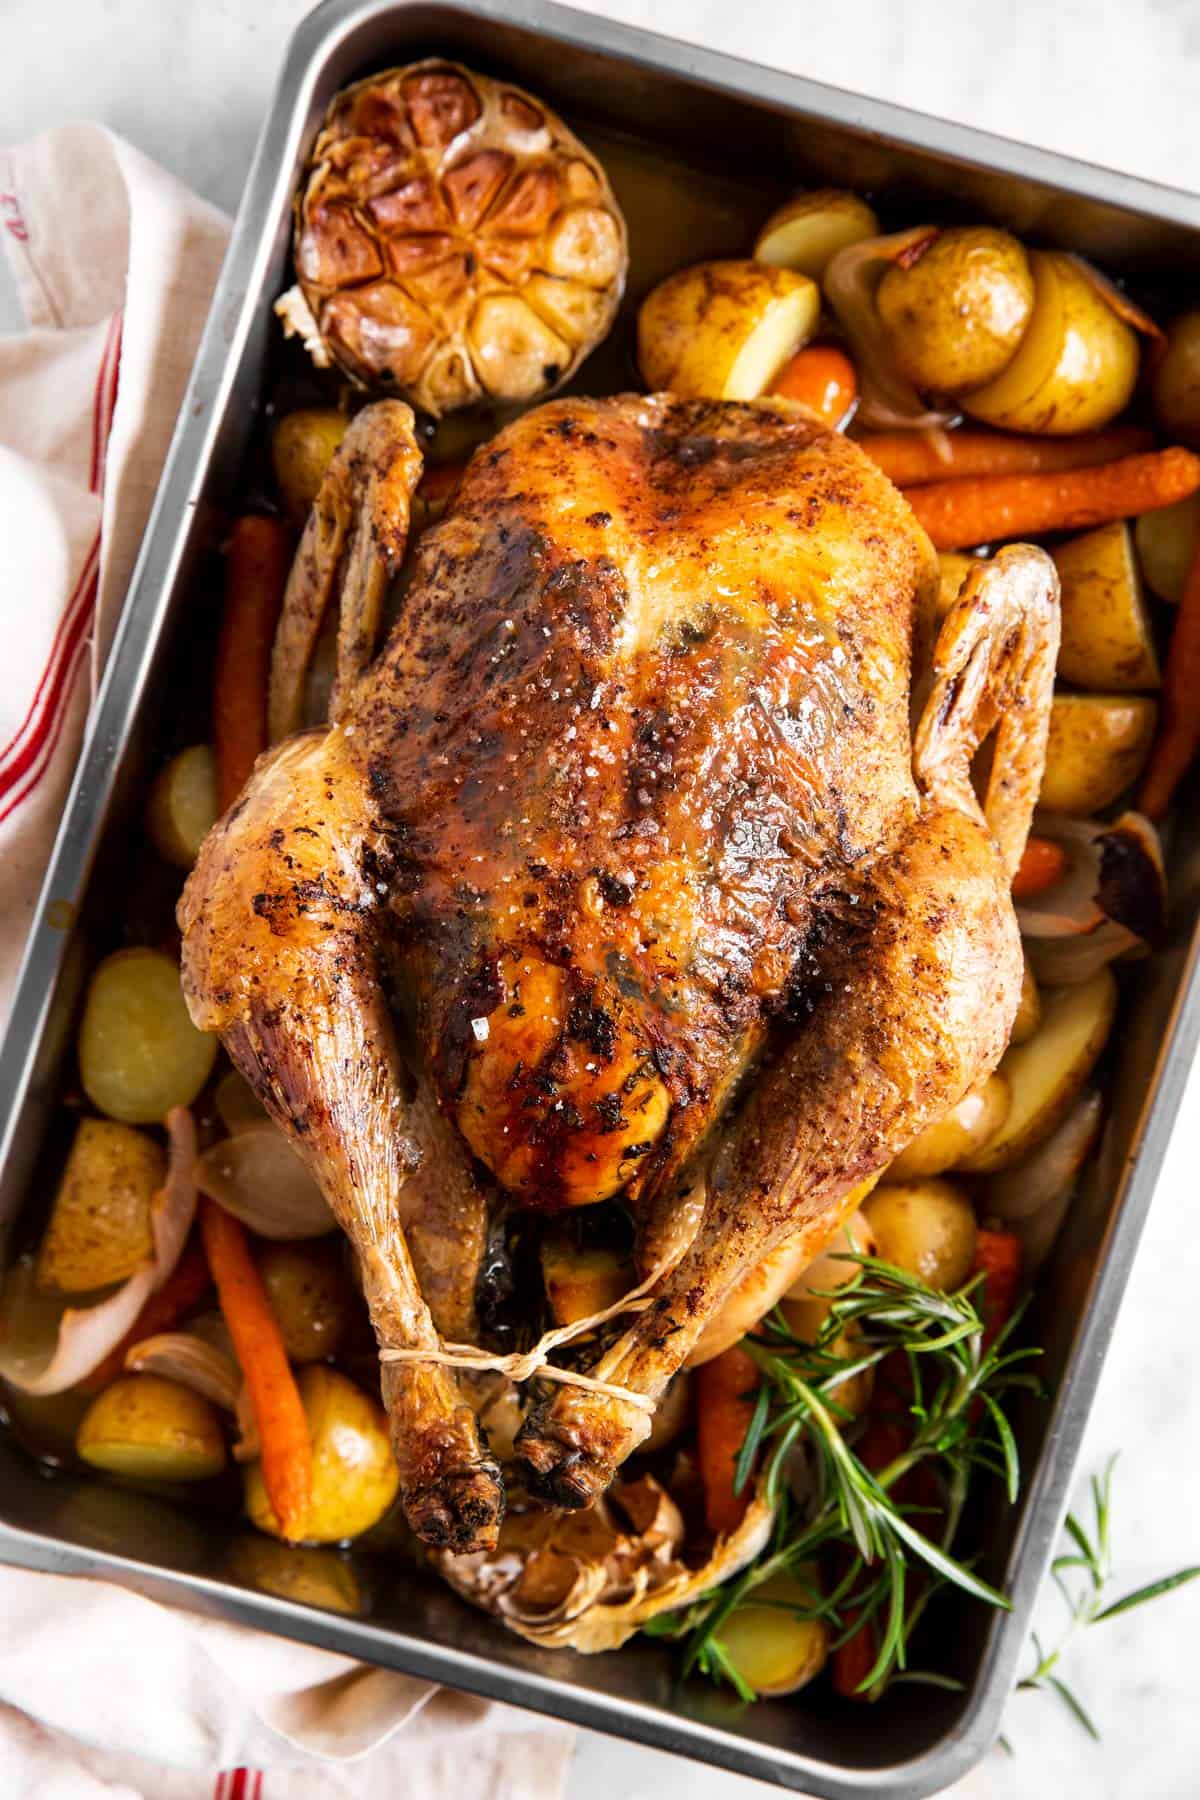 baked whole chicken recipe